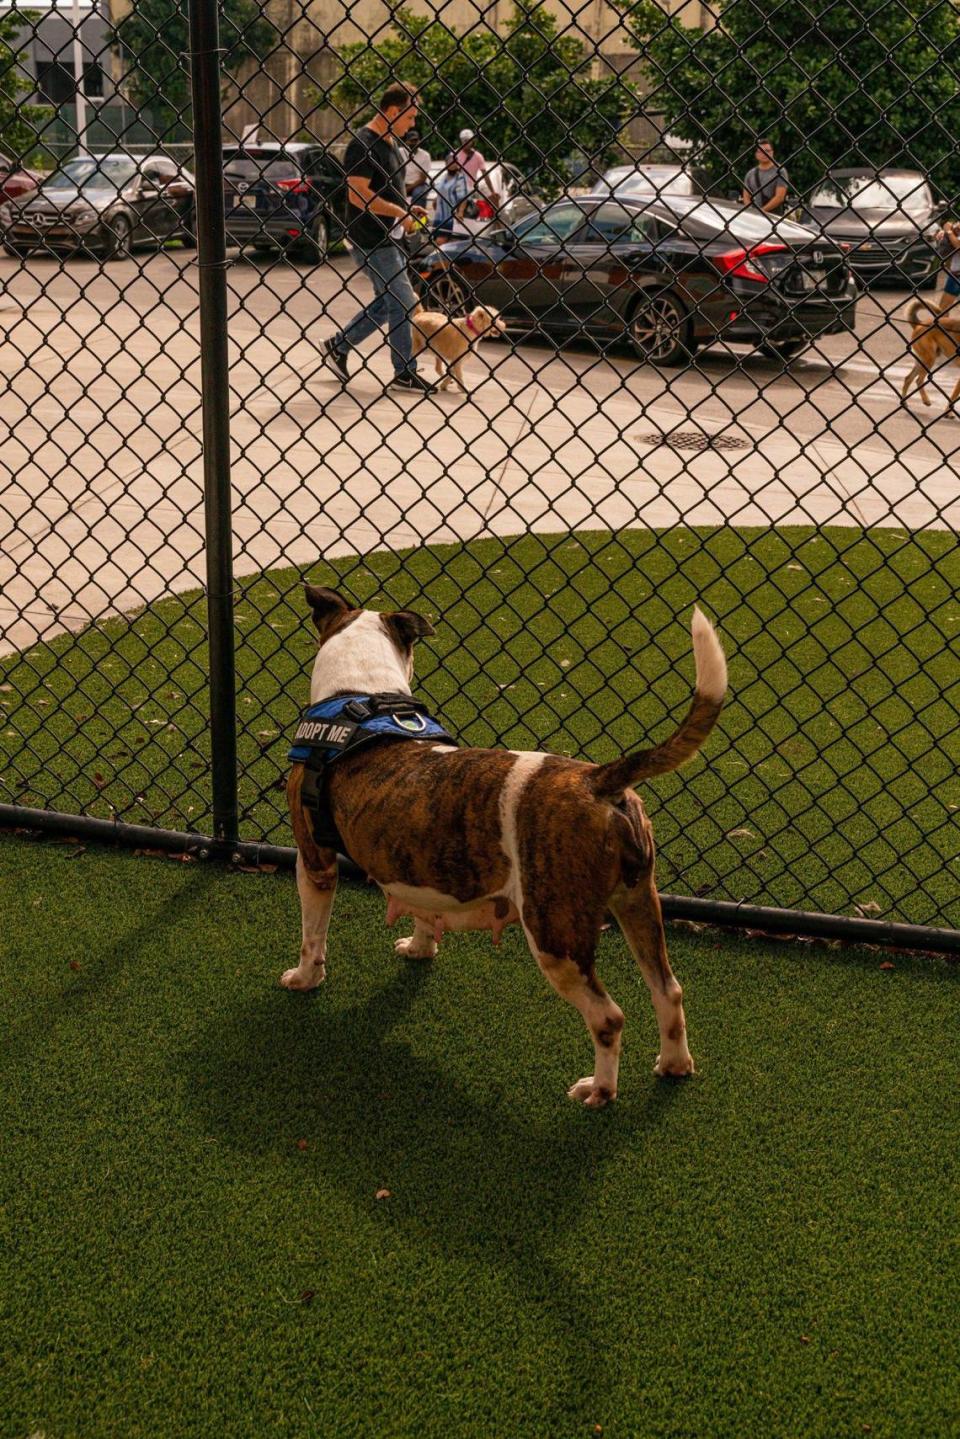 Samantha, a dog that spent over 300 days at the Miami-Dade County animal shelter in Doral, watches as people and pets walk by in late 2022.